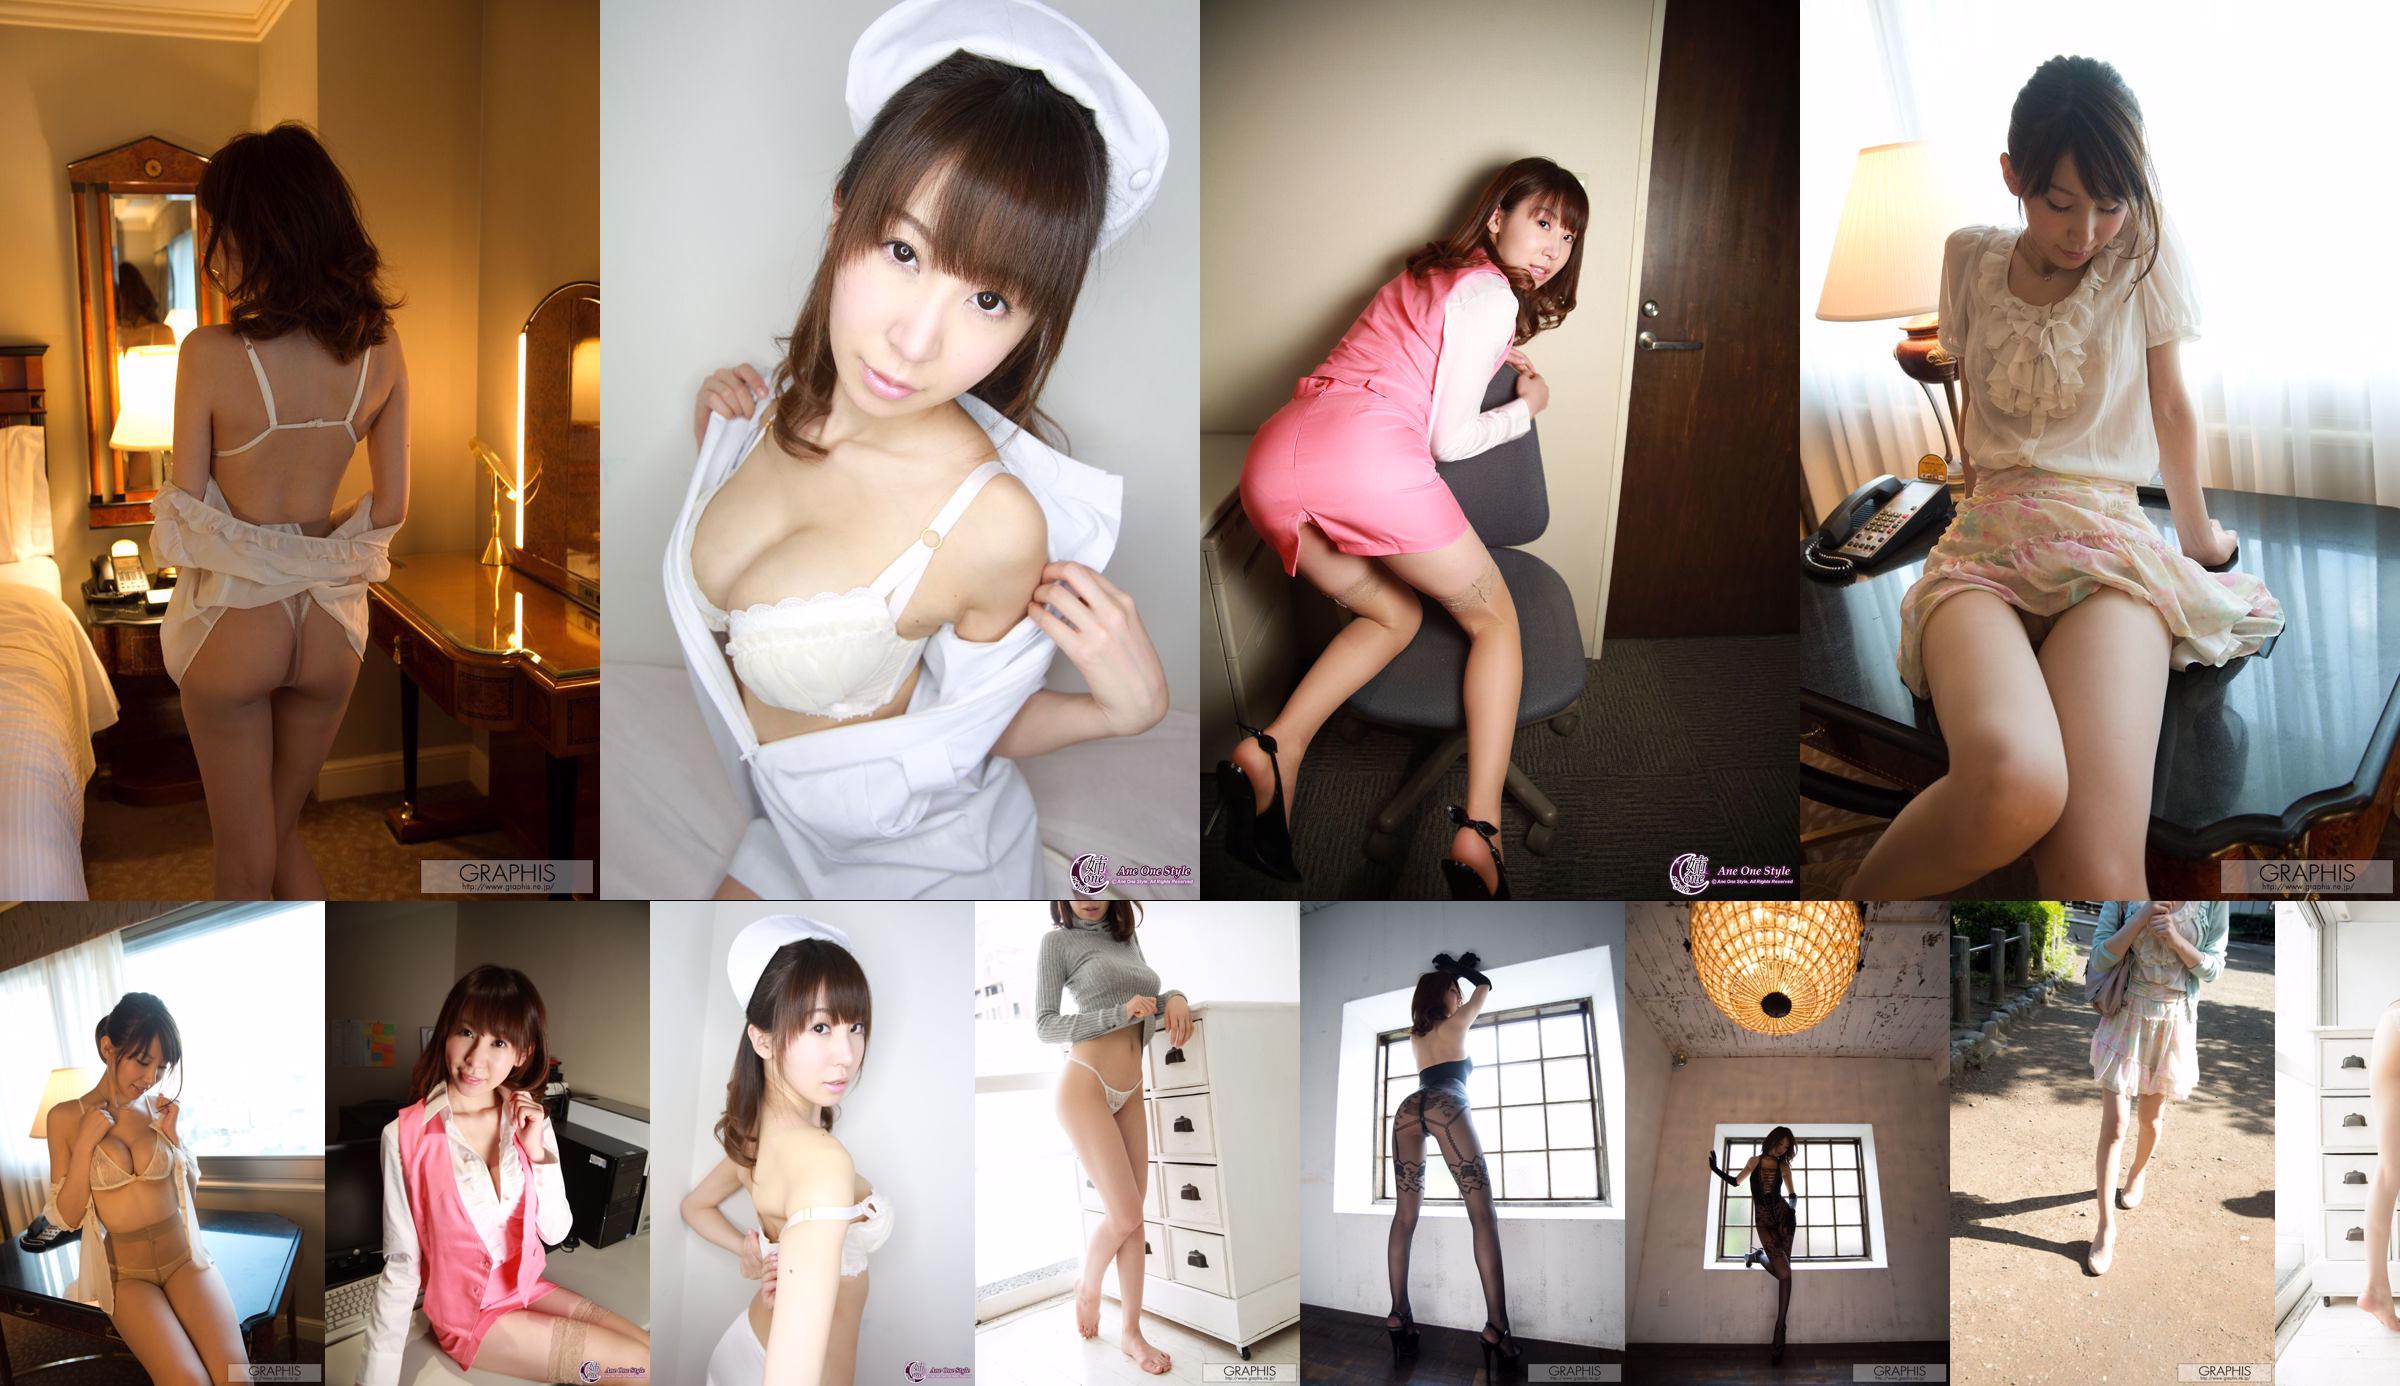 Chibana Meisa / Chibana Meisa [Graphis] First Gravure First take off daughter No.0f642b Page 14